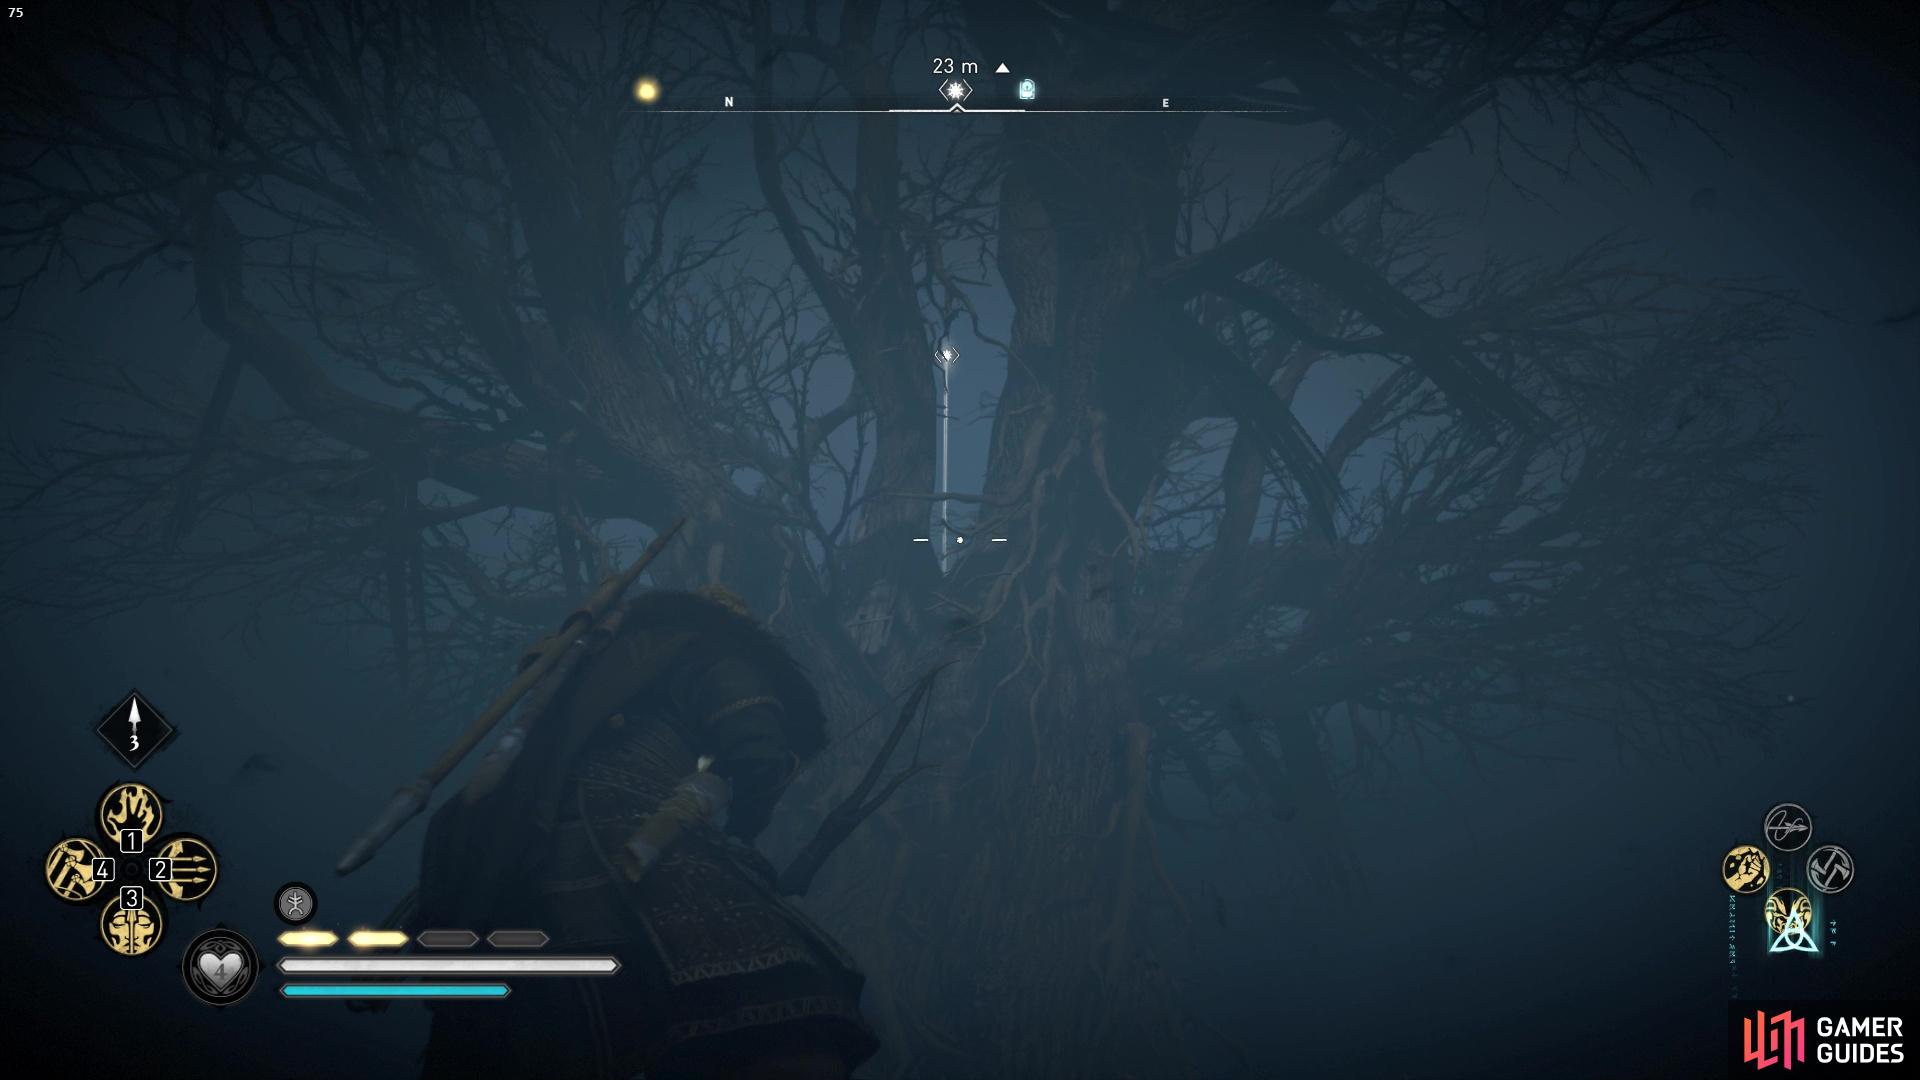 where you'll need to shoot the cursed symbol in the tree.